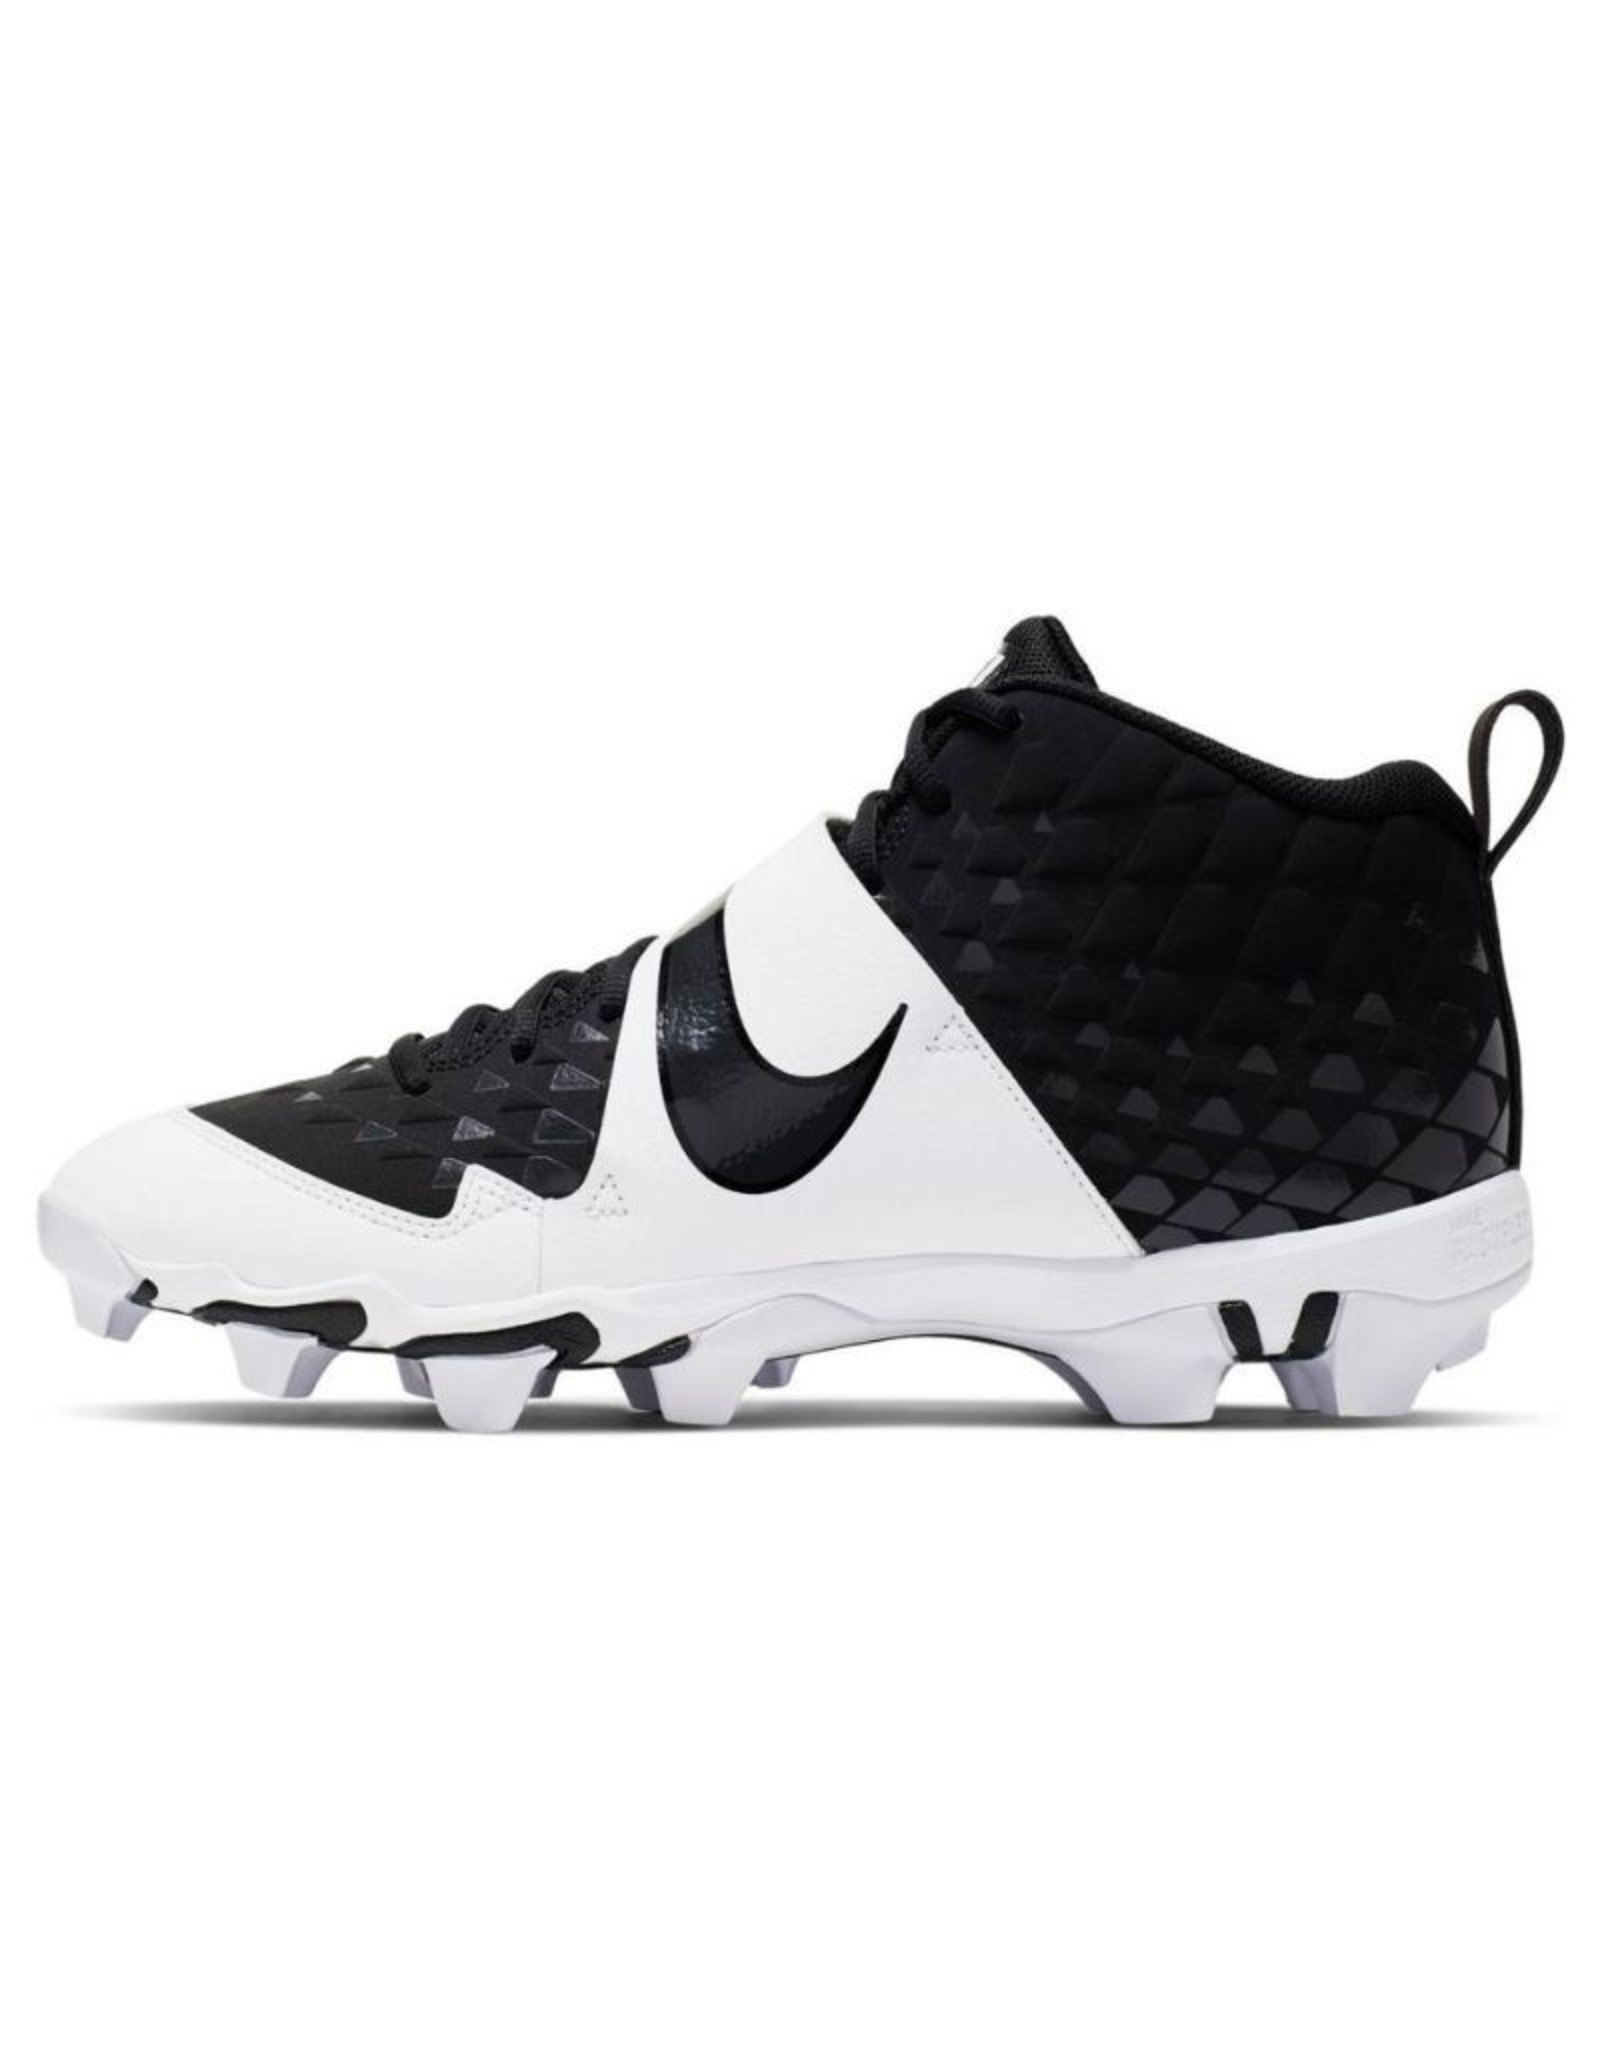 nike trout molded baseball cleats